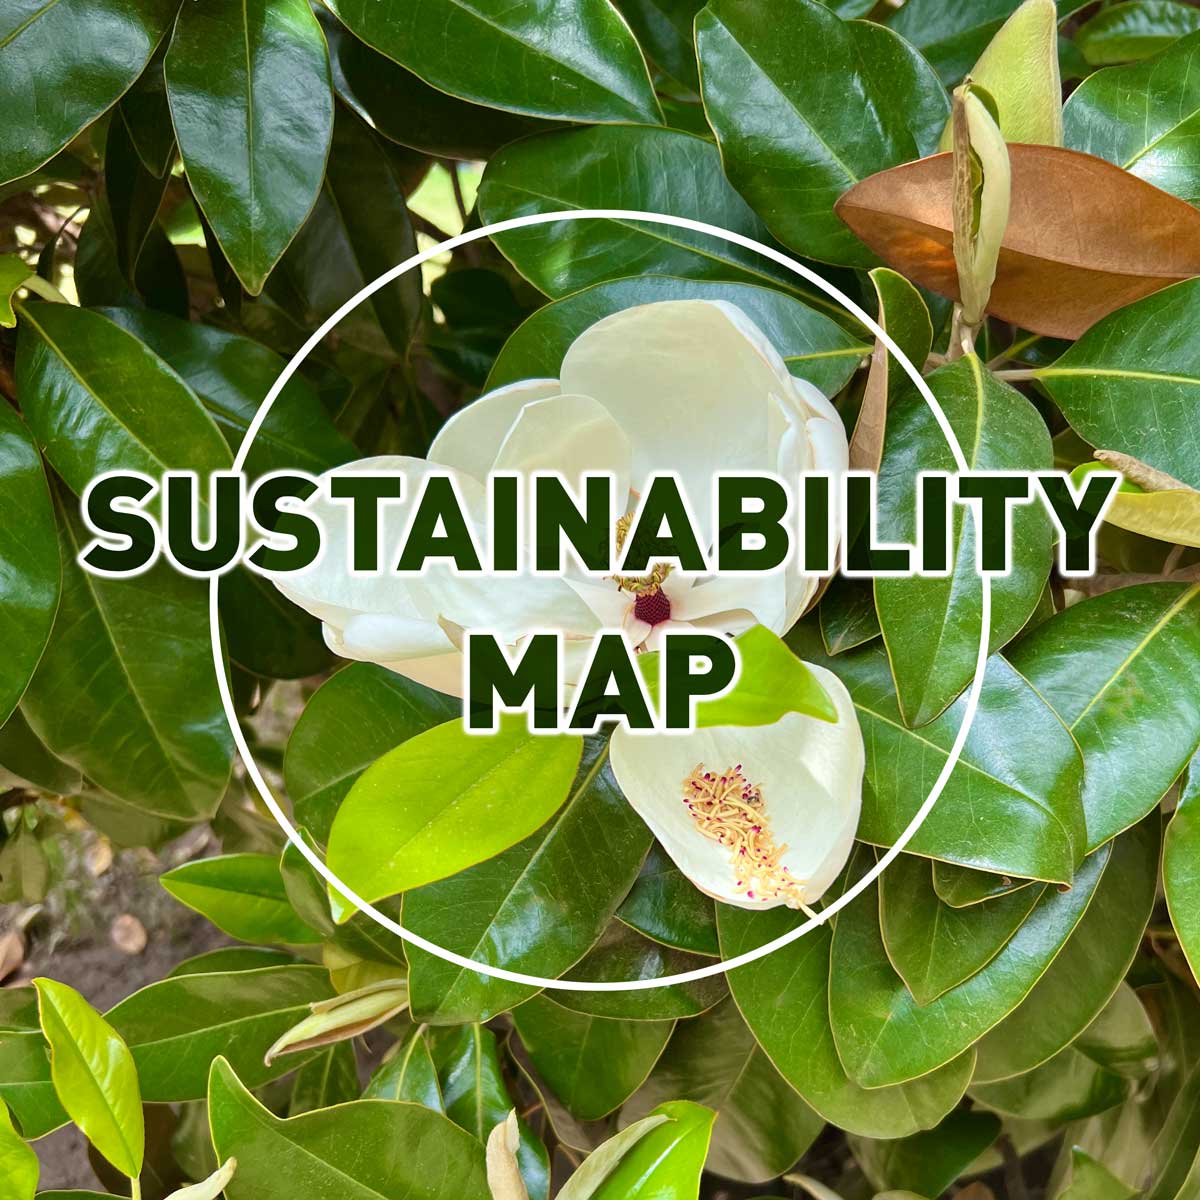 Sustainability Map - Download the Full-Size Map